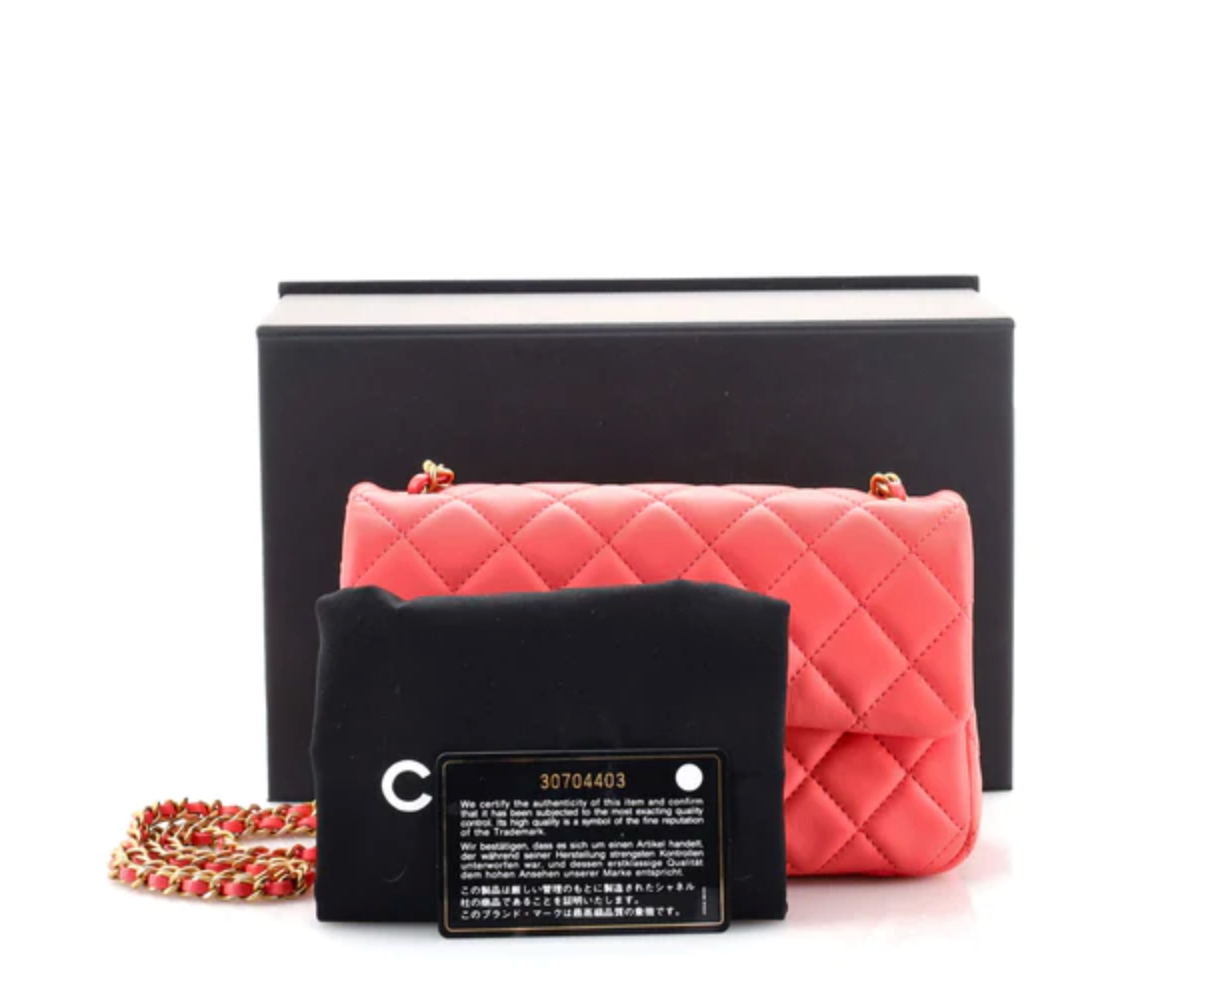 Auth Chanel Just Mademoiselle Quilted Bowler Red Lumbskin Bag - Pre-Owned